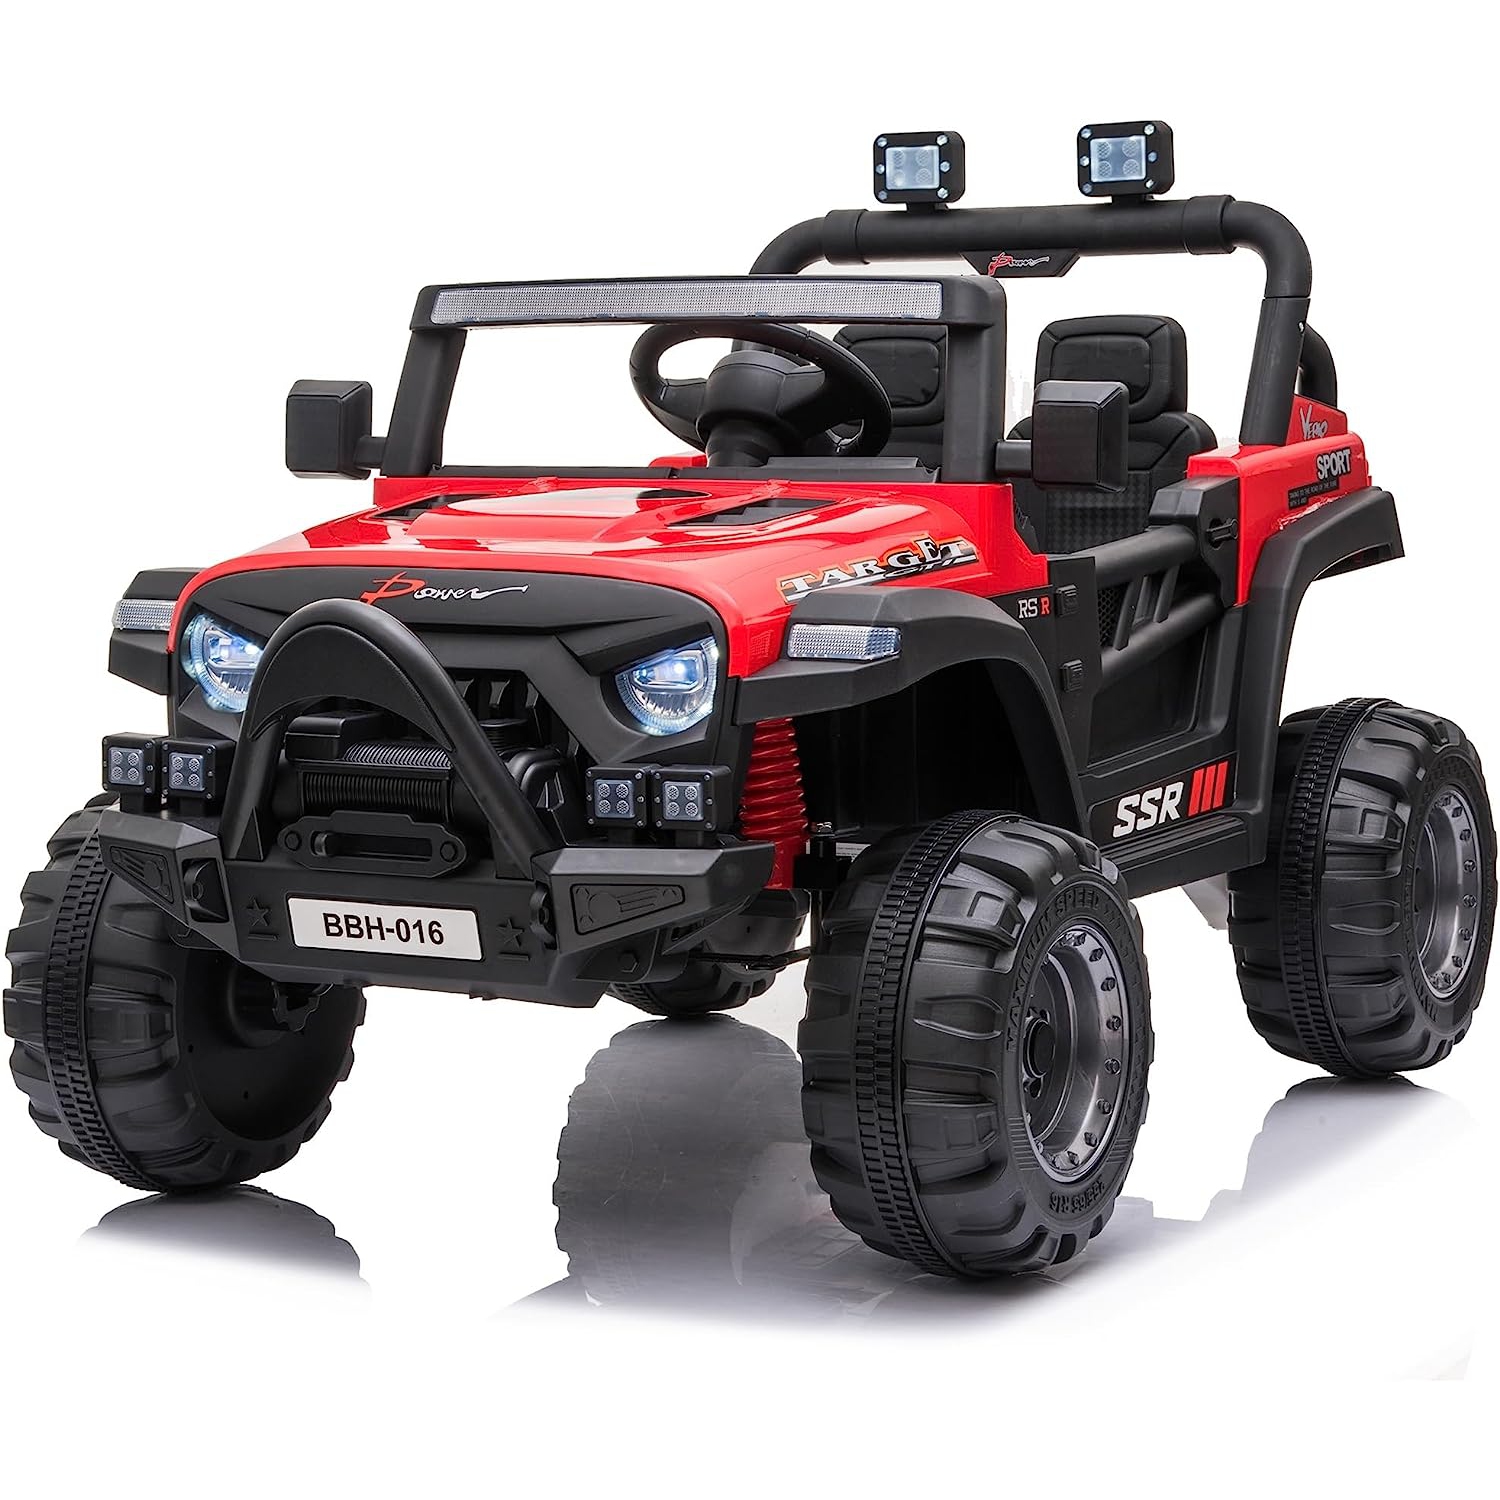 12V Jeep with Angry Face Grill Kids Ride On Car Toy with Lights and Remote Control